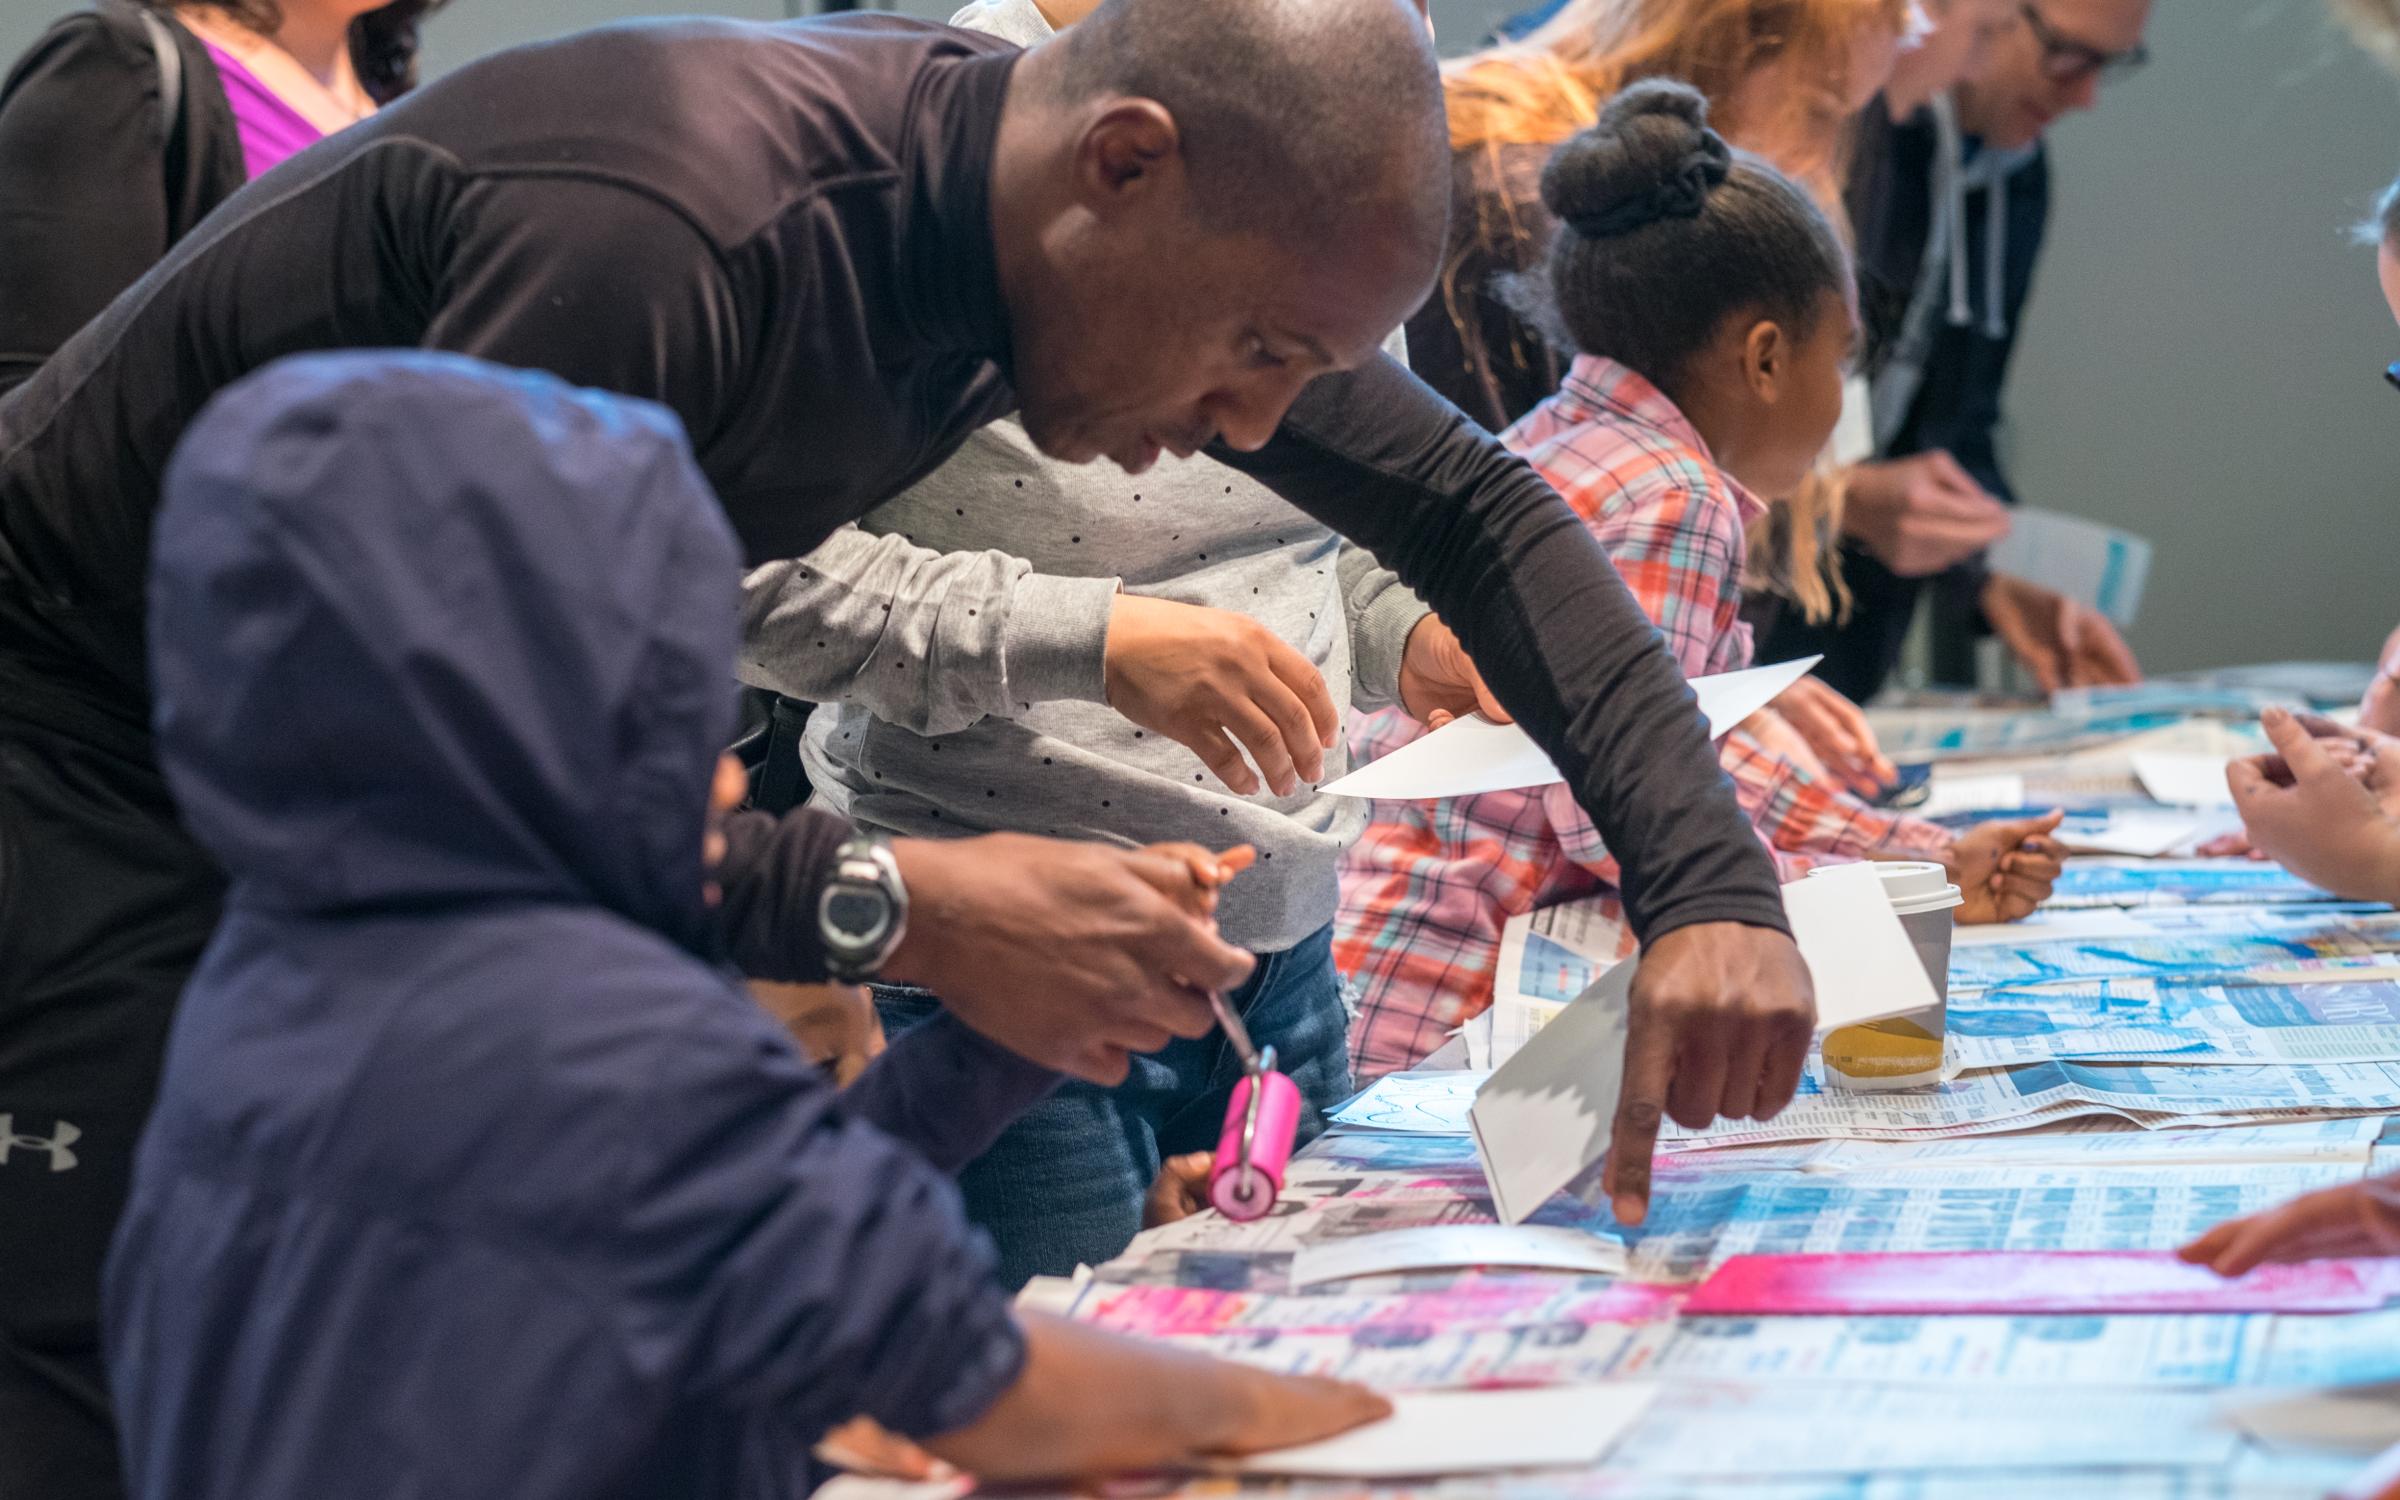 A black father and his son painting prints on newspapers